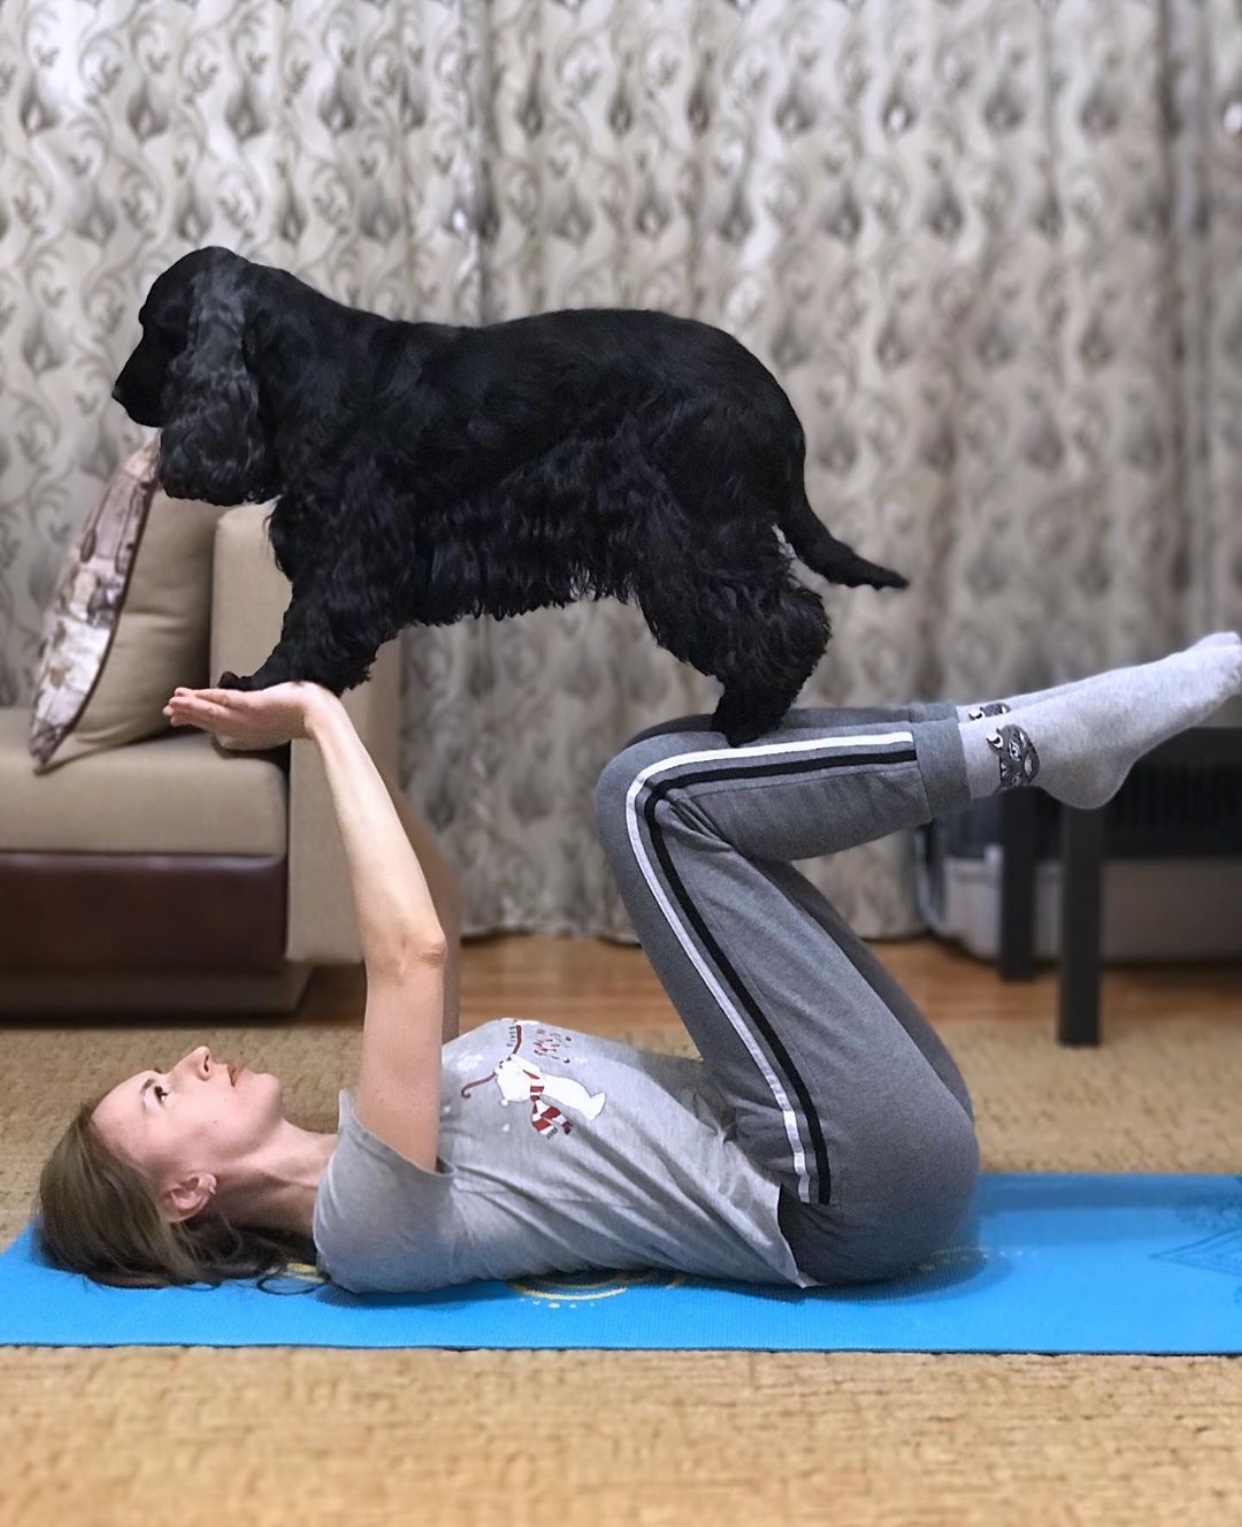 A black English Cocker Spaniel standing on the hand and legs of a woman lying on the yoga mat